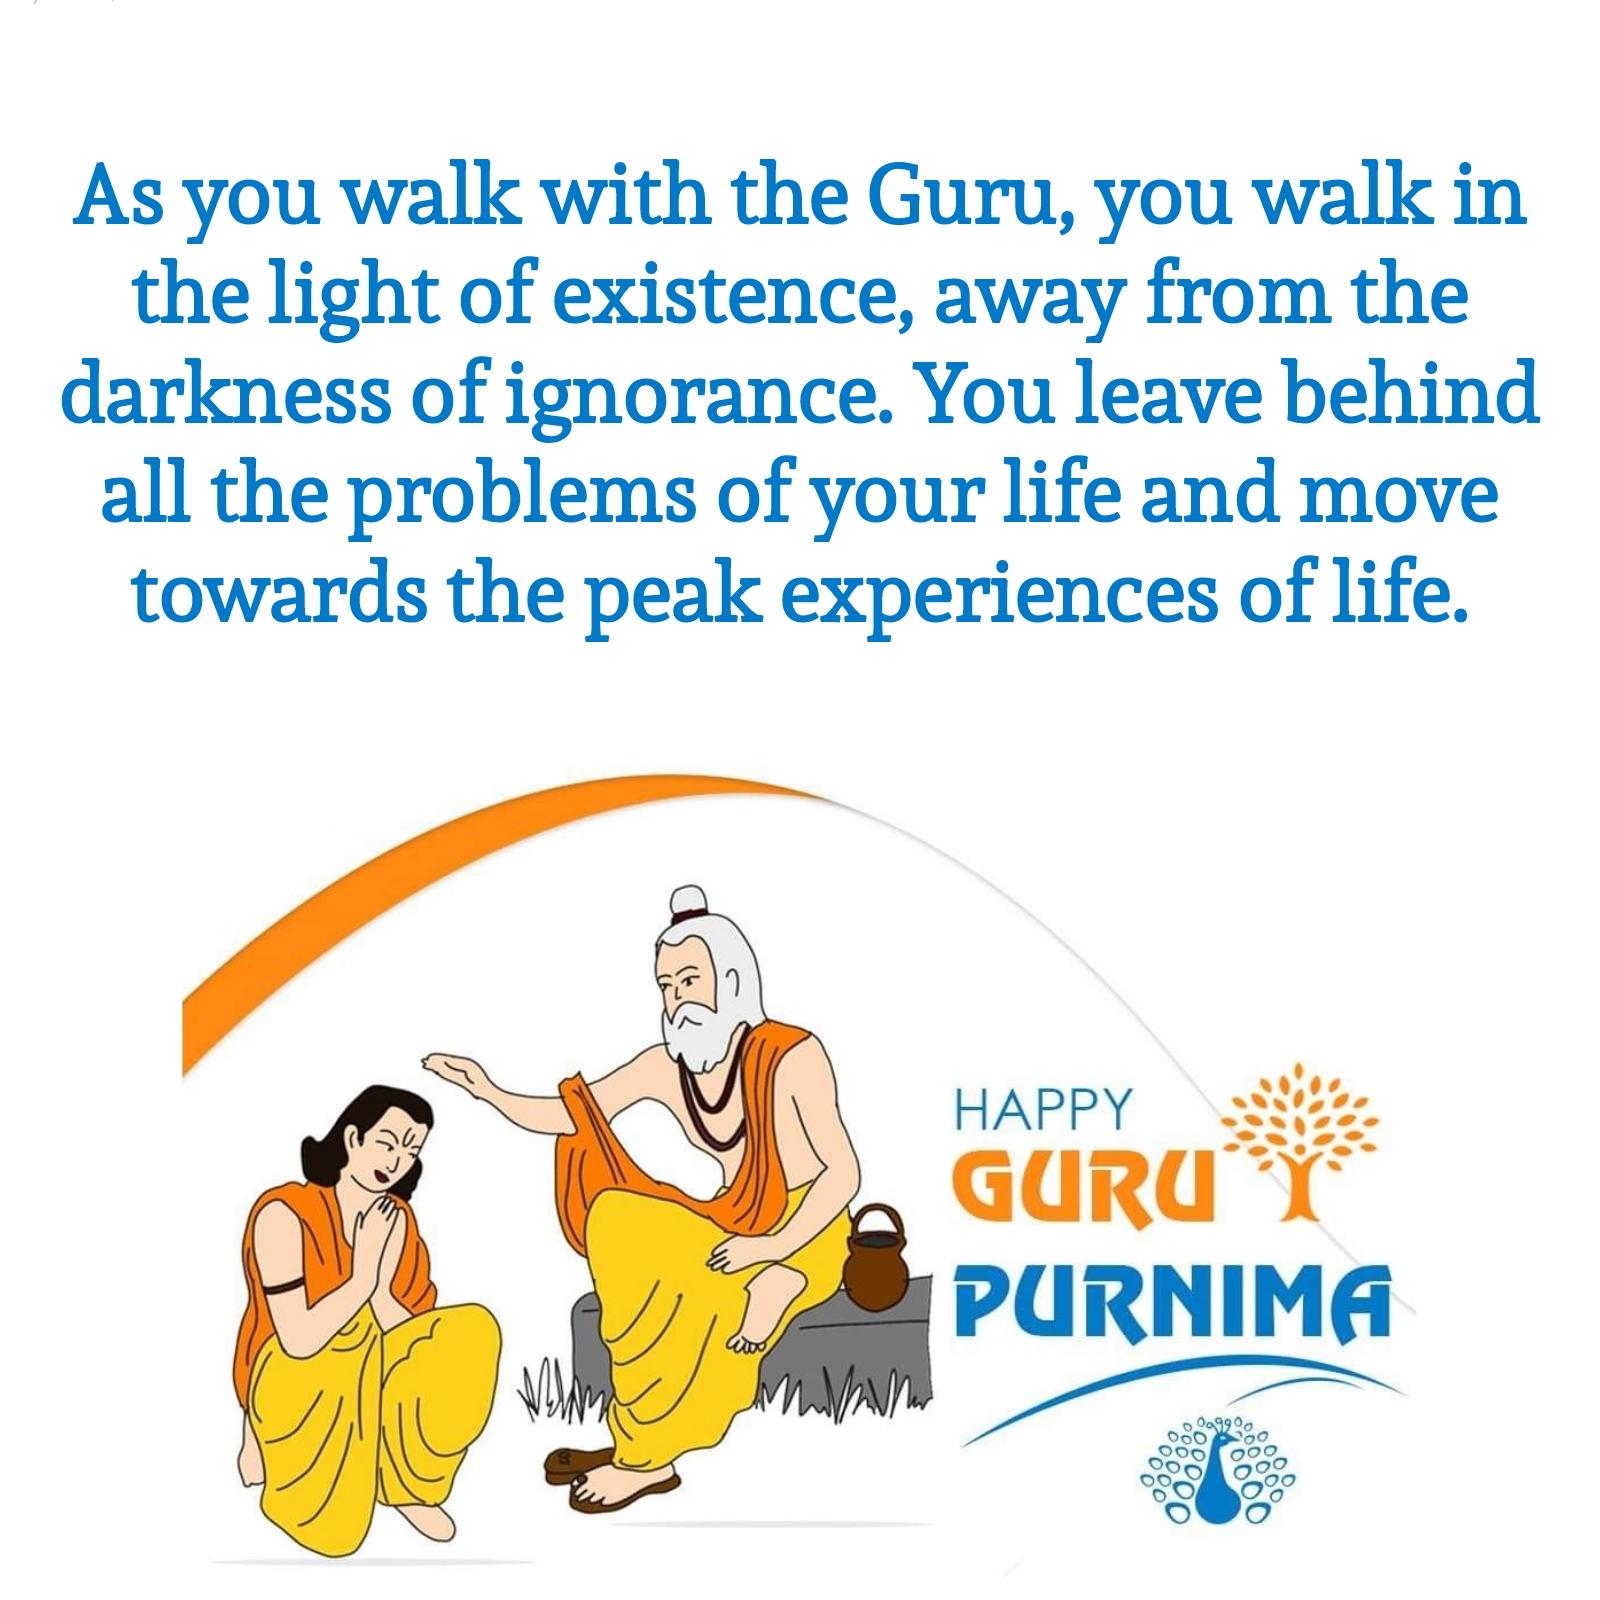 As you walk with the Guru you walk in the light of existence